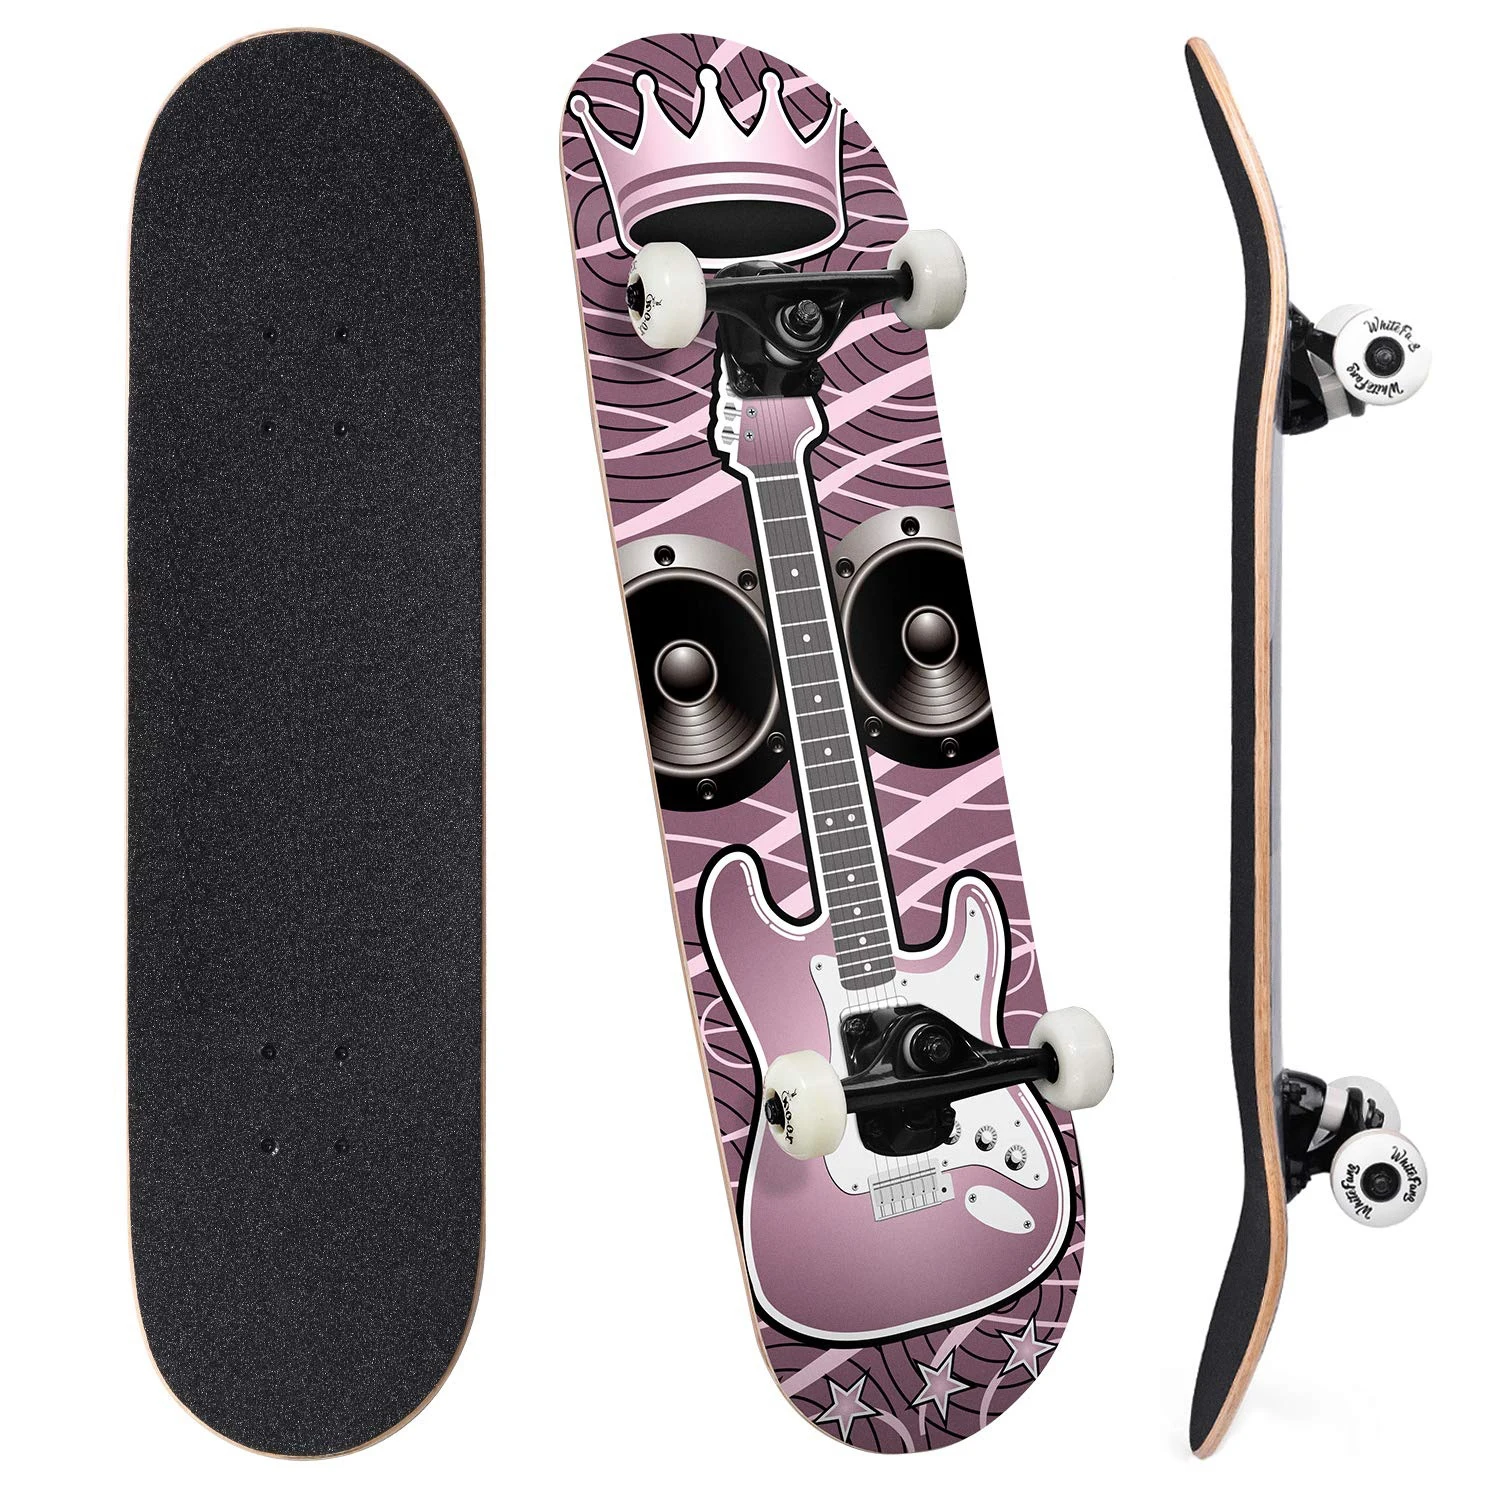 

Skateboards Complete Skateboard 31 x 7.88 for Kids, Youths, Teens, Beginners, and Adults, 7 Layers Radial Concave Standard Canad